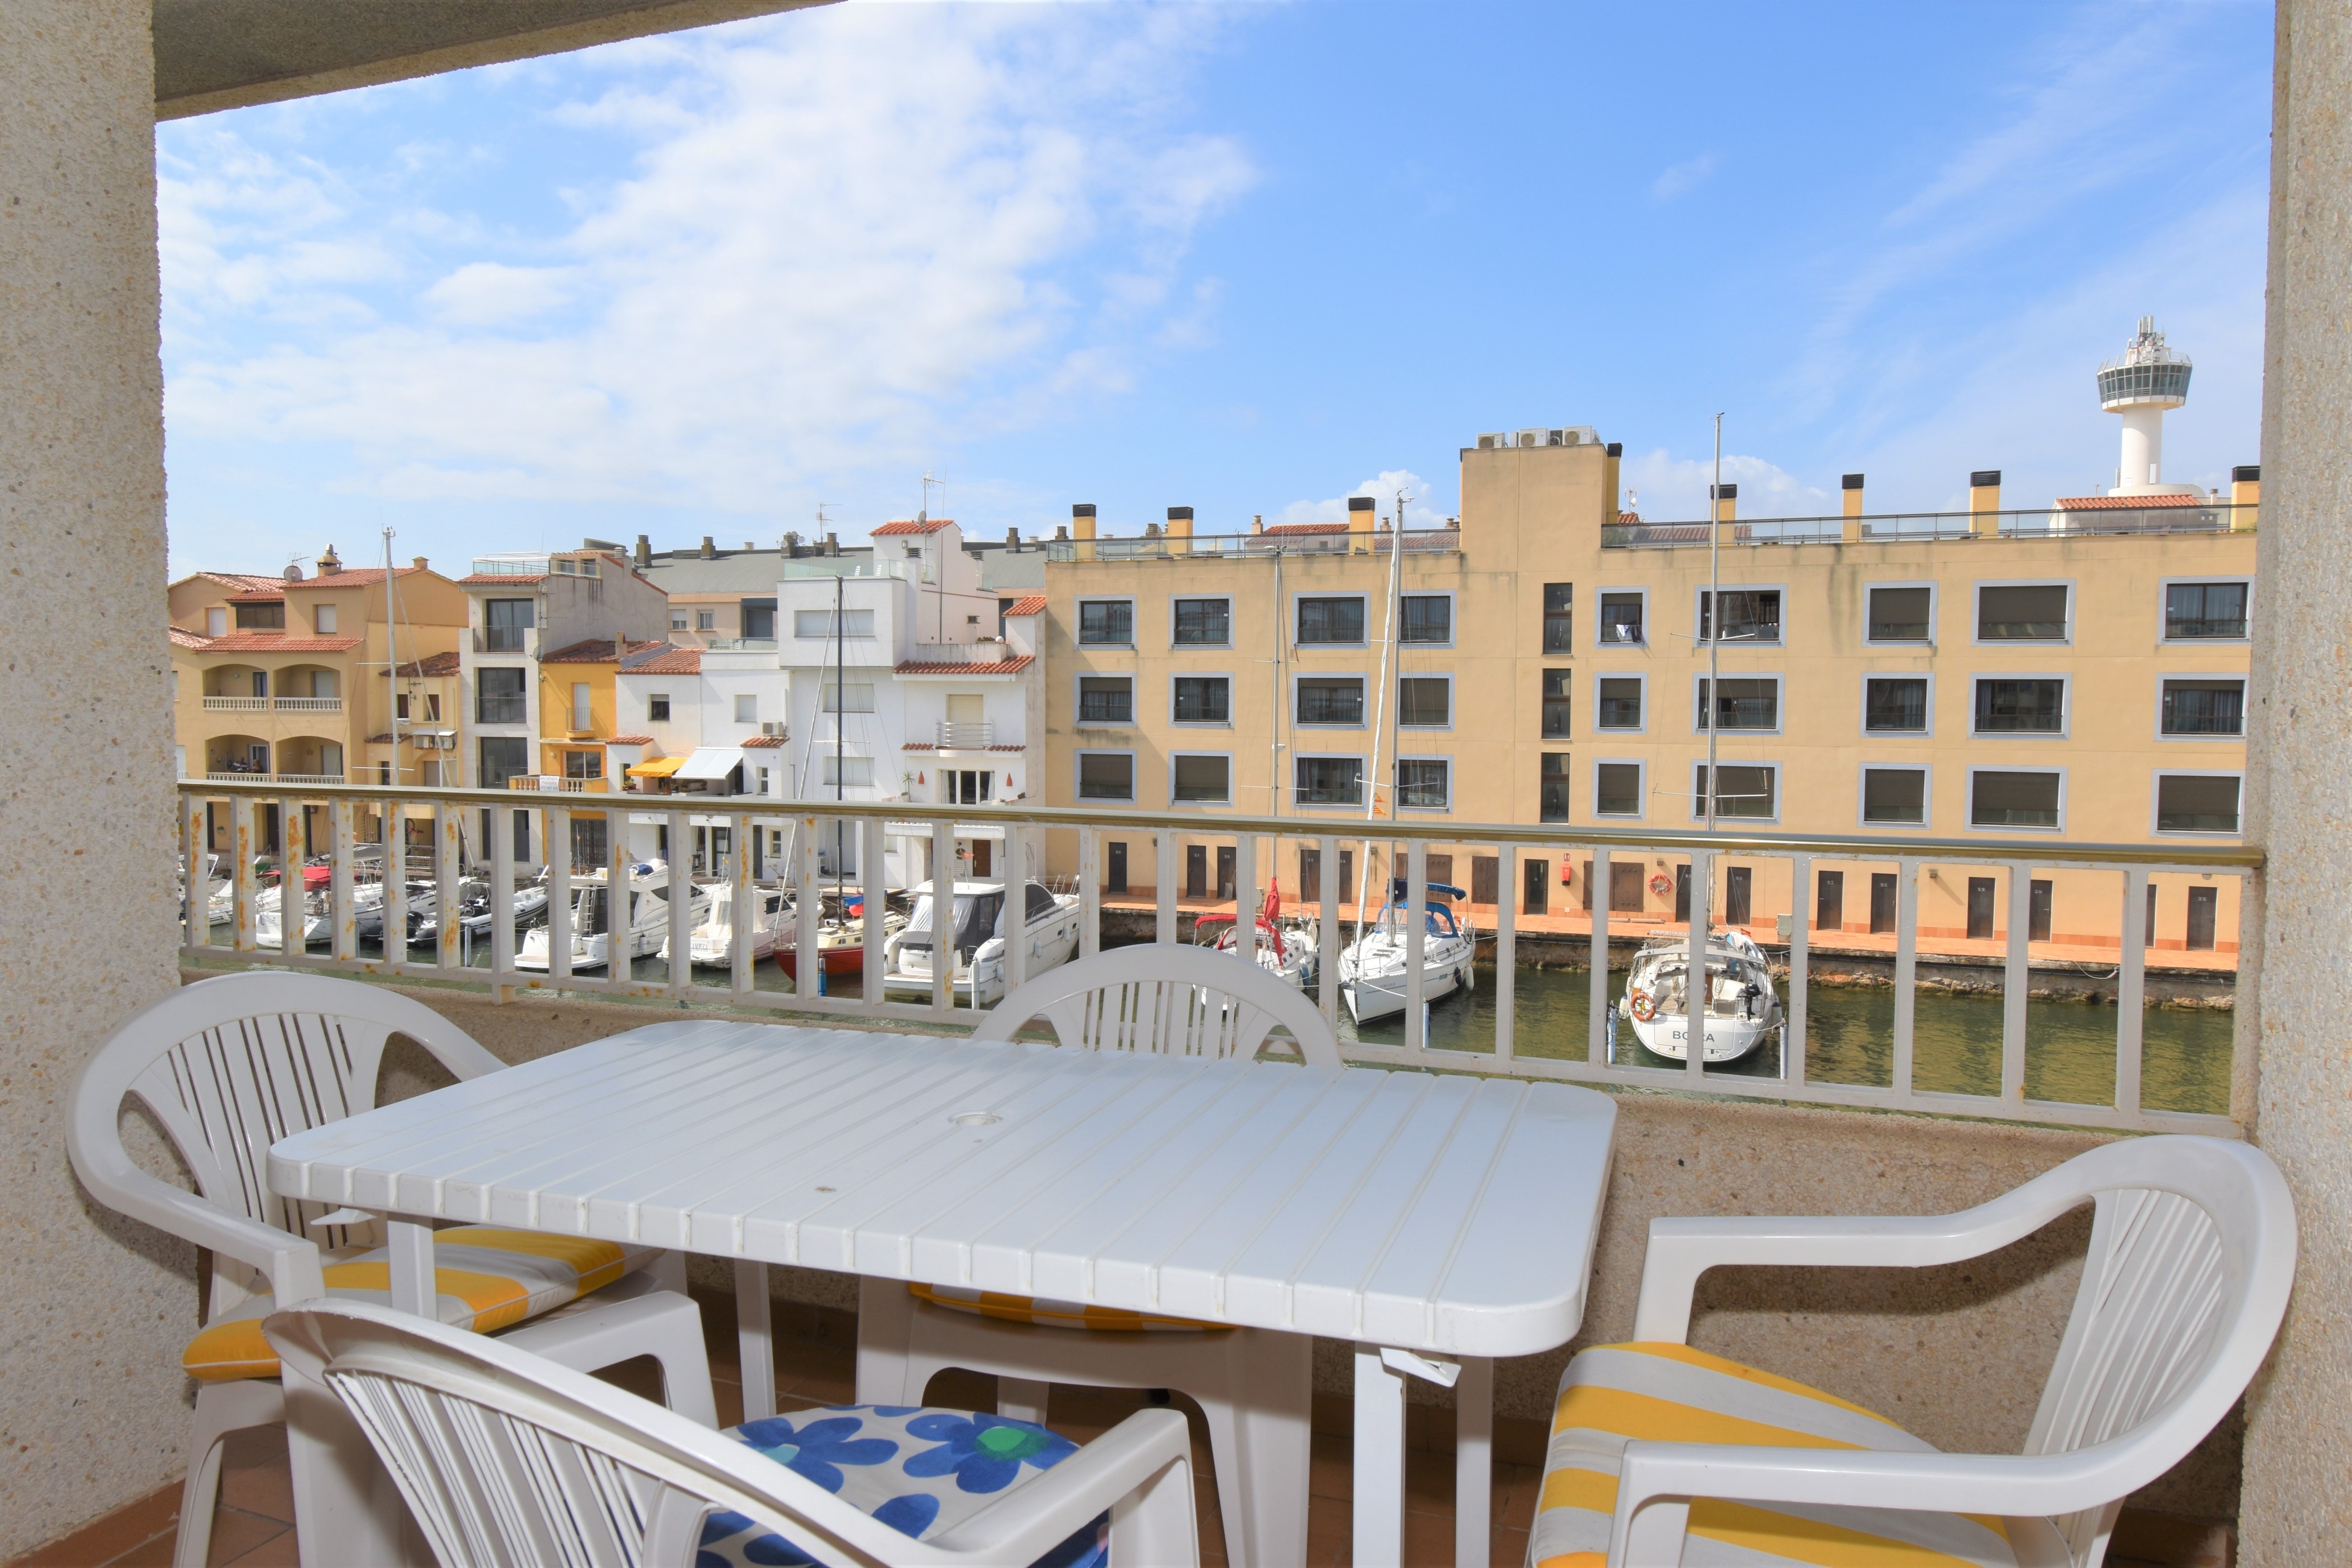 EMPURIABRAVA: Apartment two bedrooms with a nice view